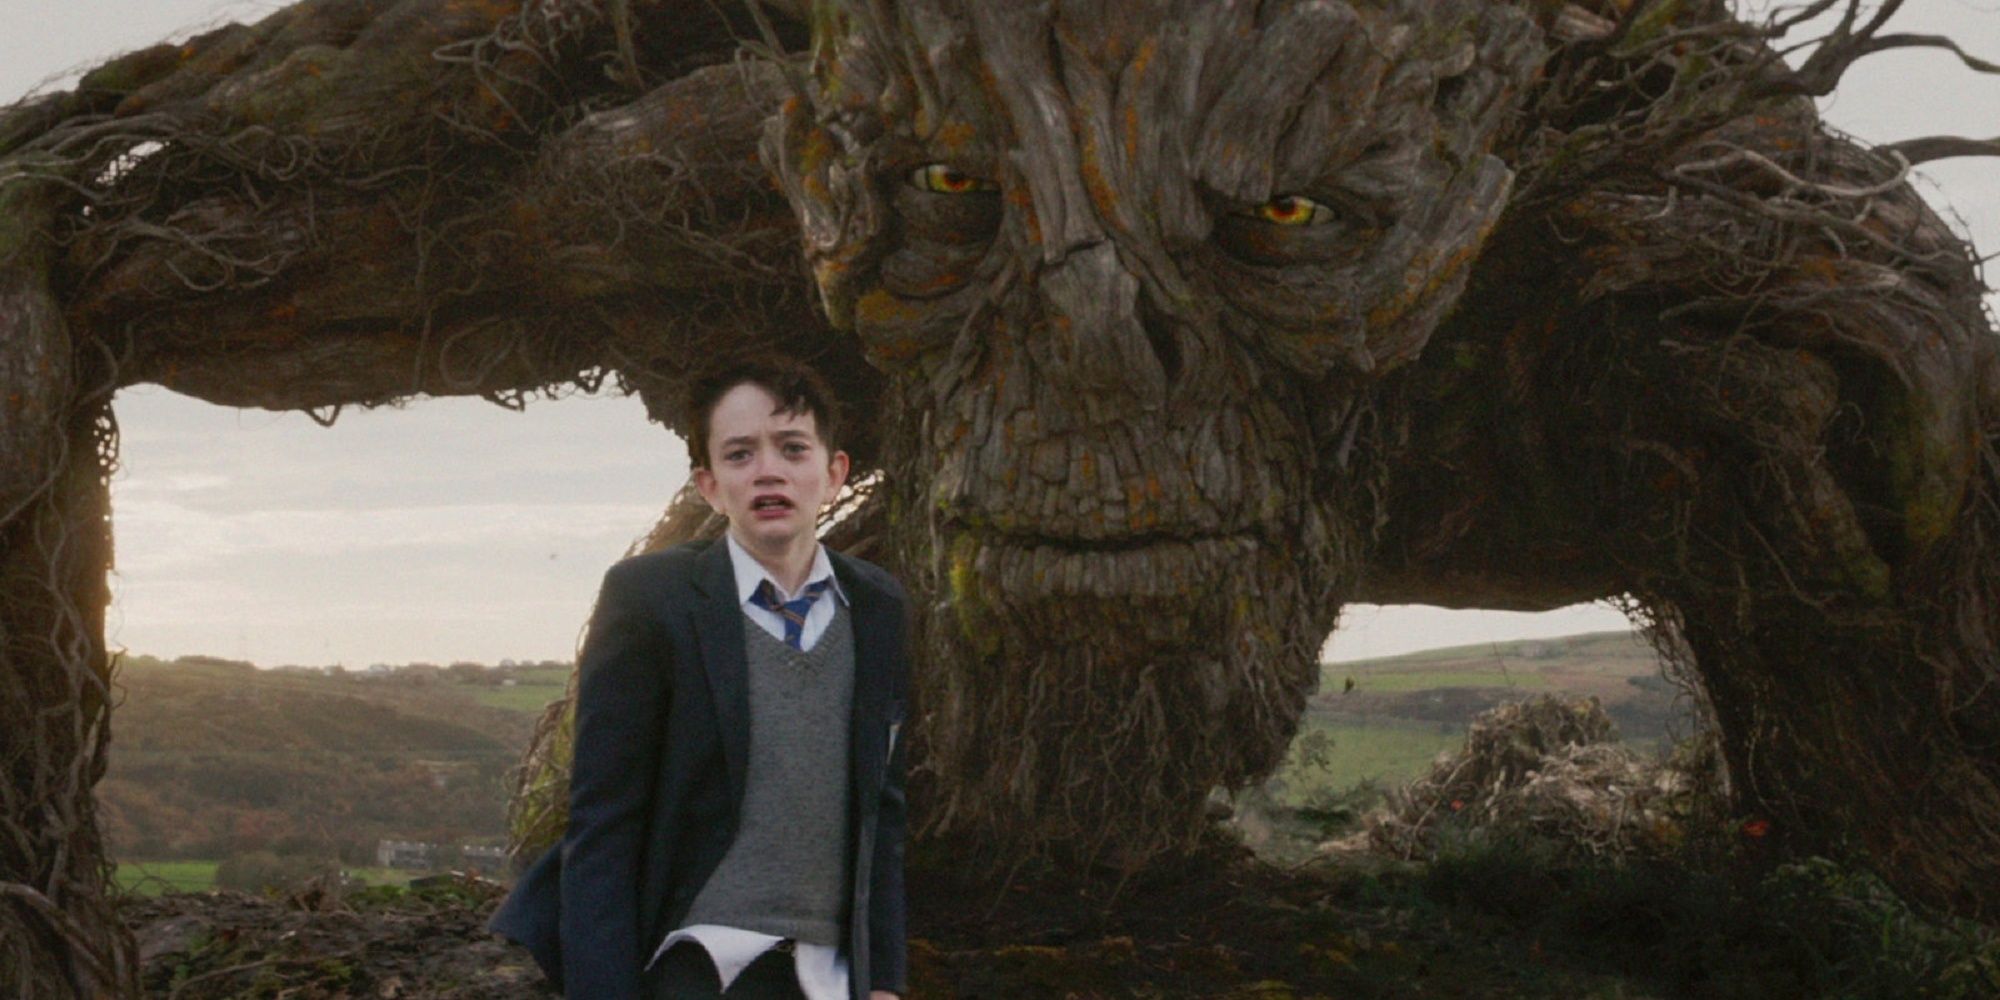 Conor and the Monster looking ahead in A Monster Calls.